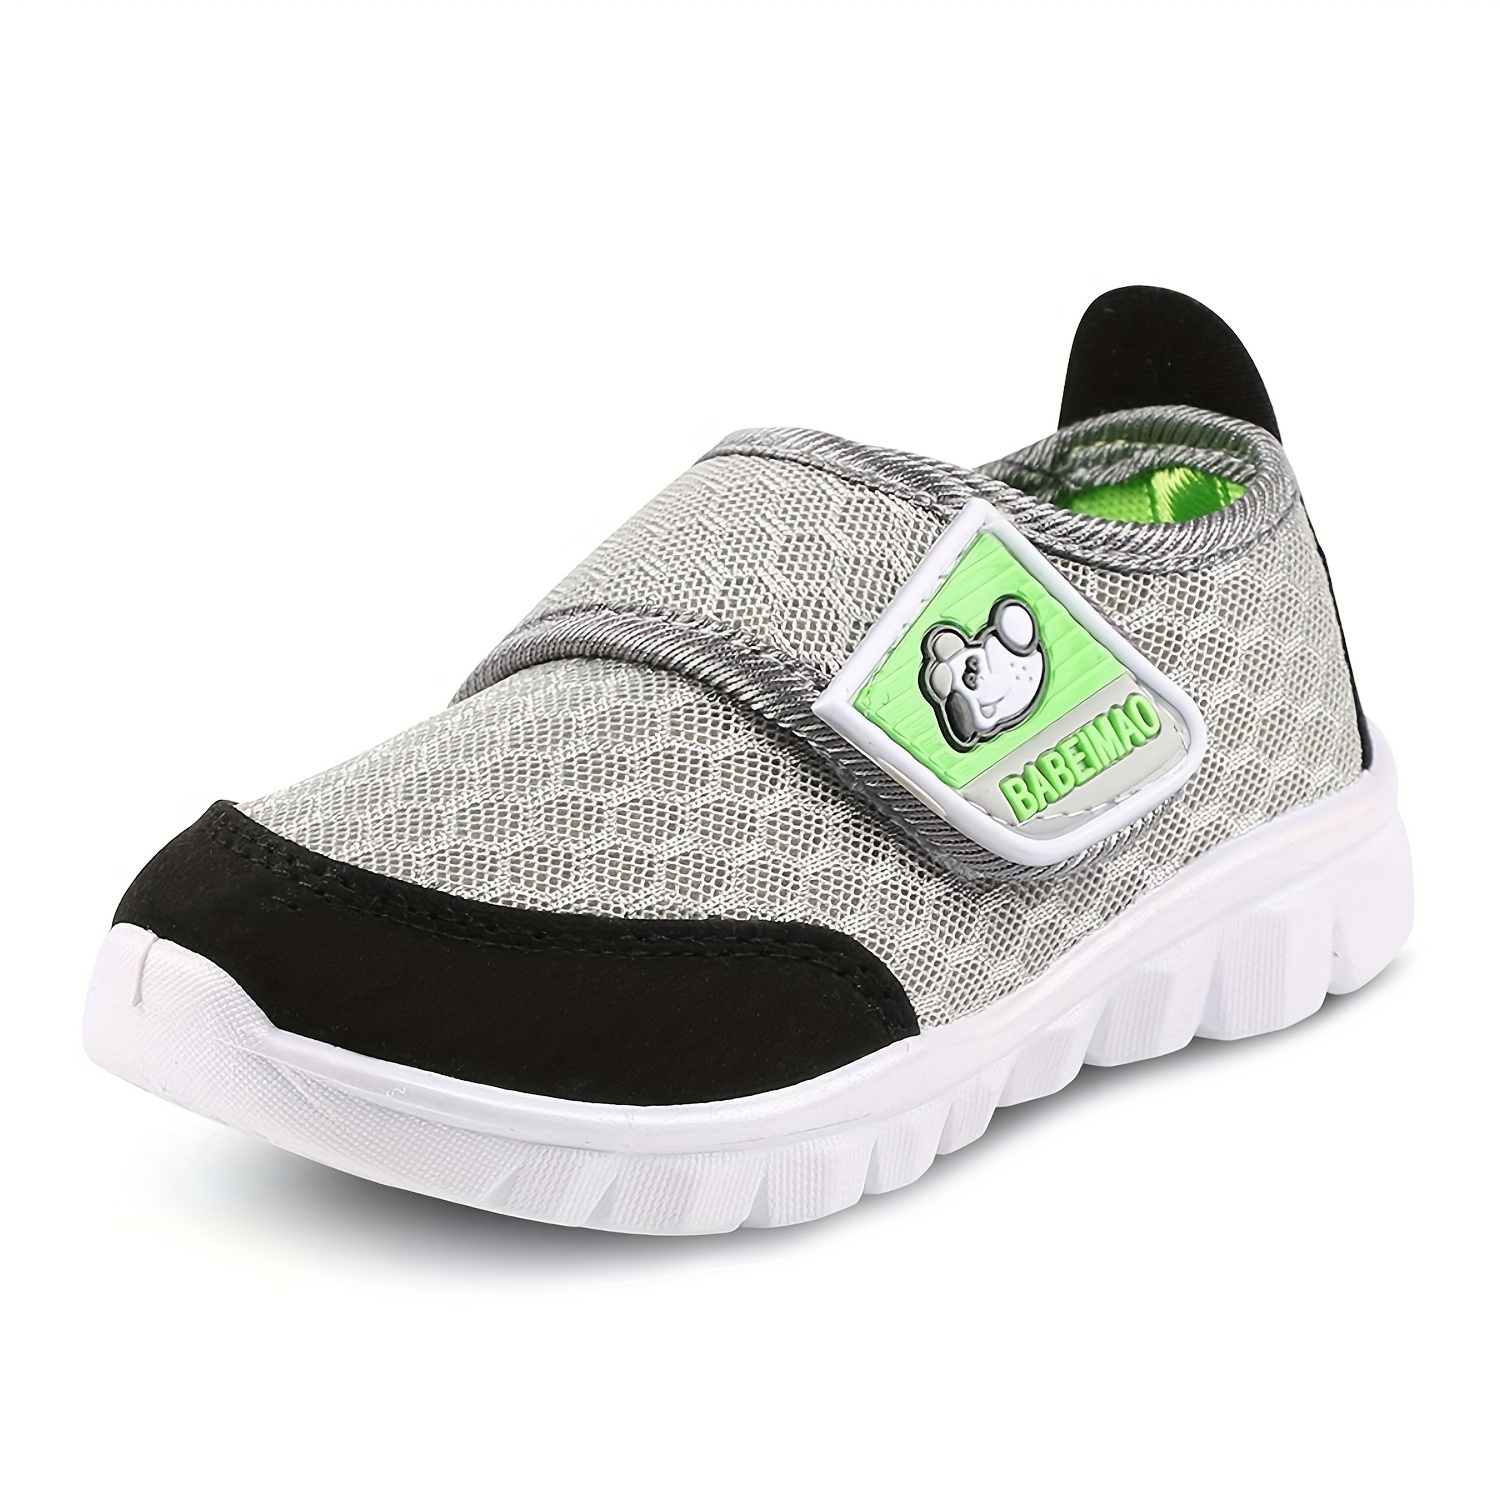 Casual Low Top Mesh Sneakers For Boys, Breathable Lightweight Walking Shoes For All Seasons